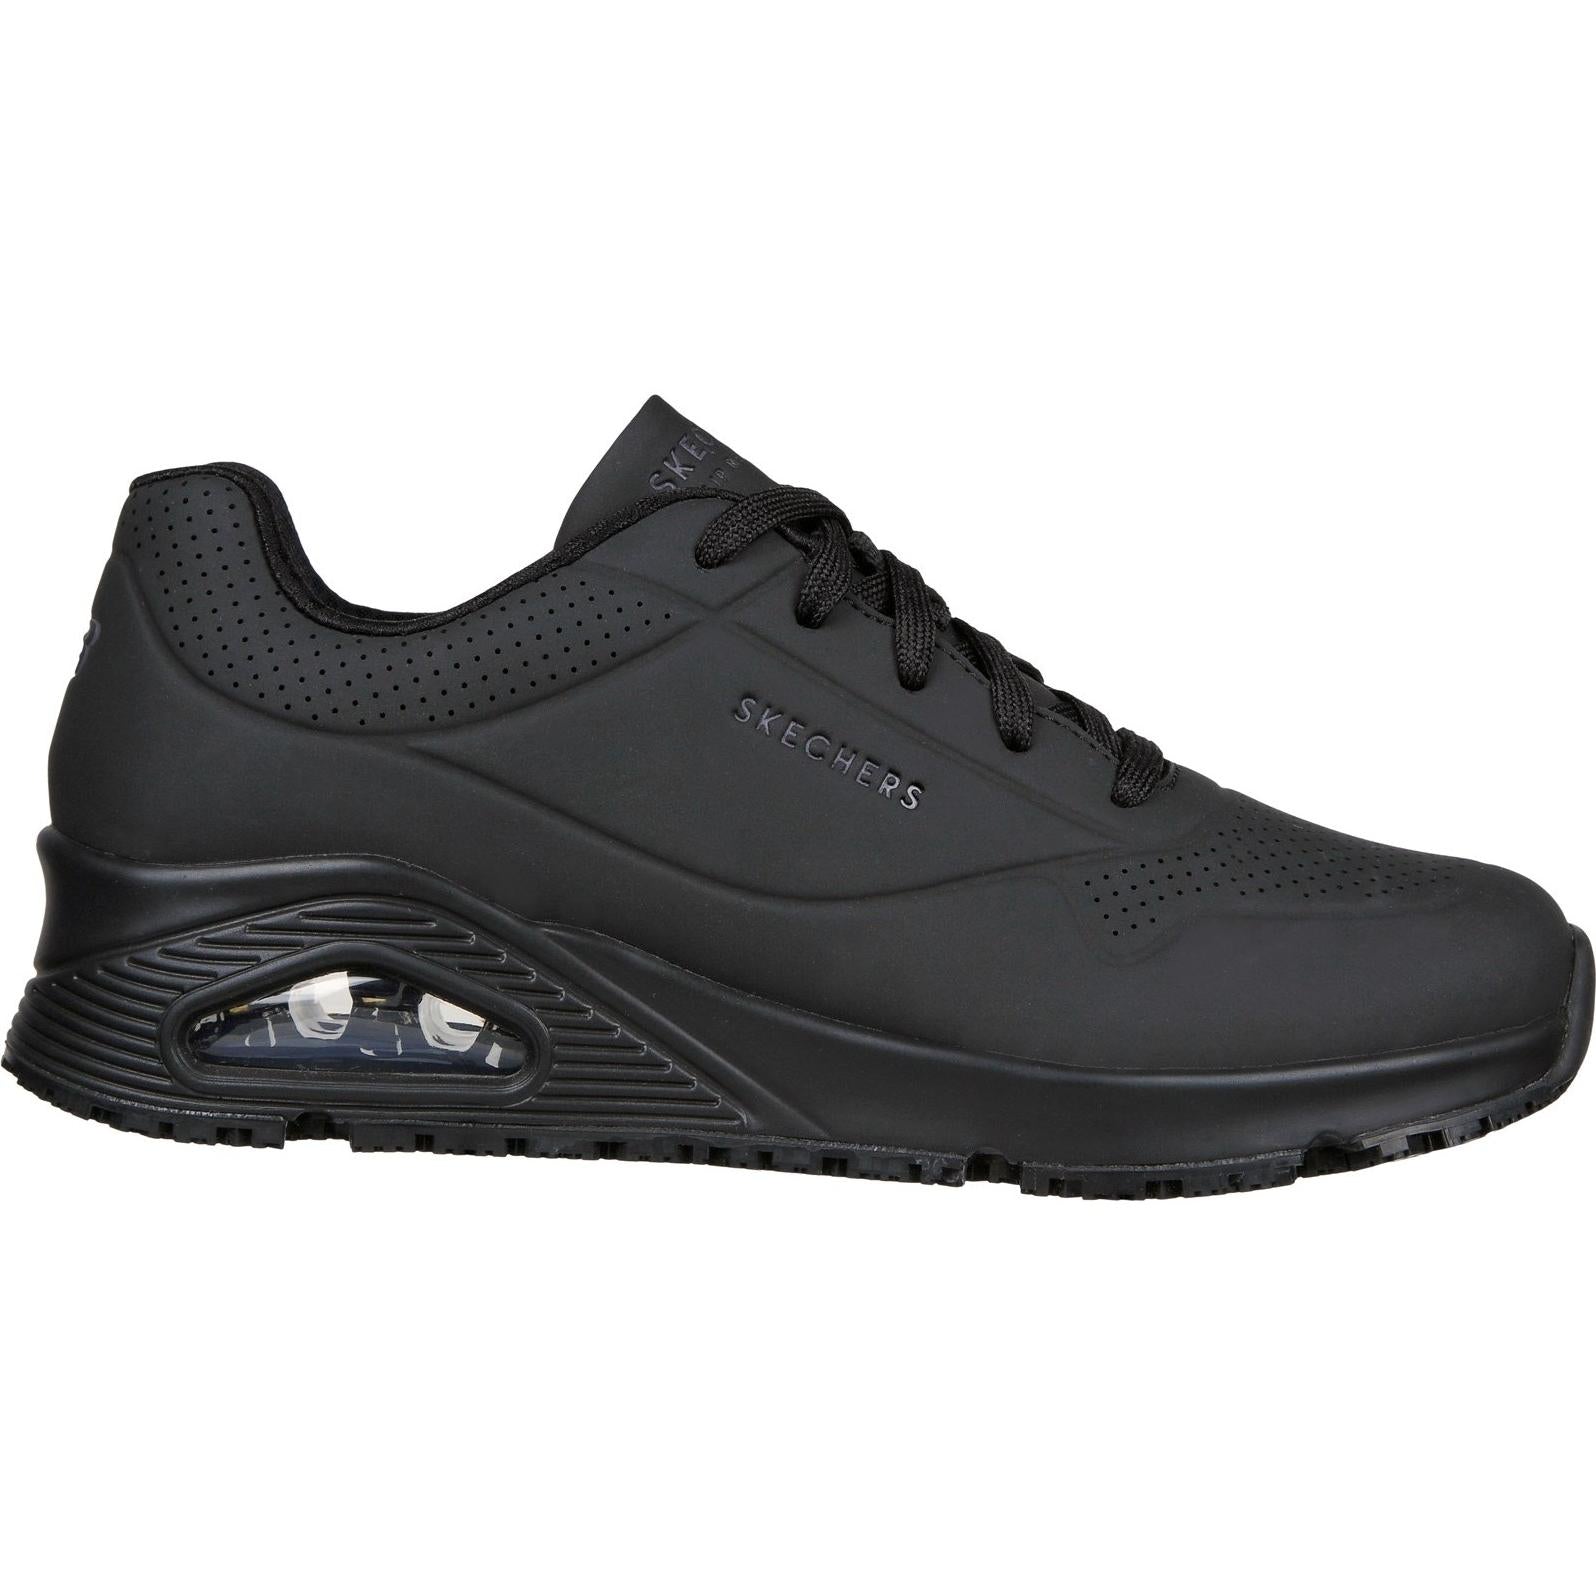 Skechers Work Relaxed Fit: Uno SR Safety Shoe